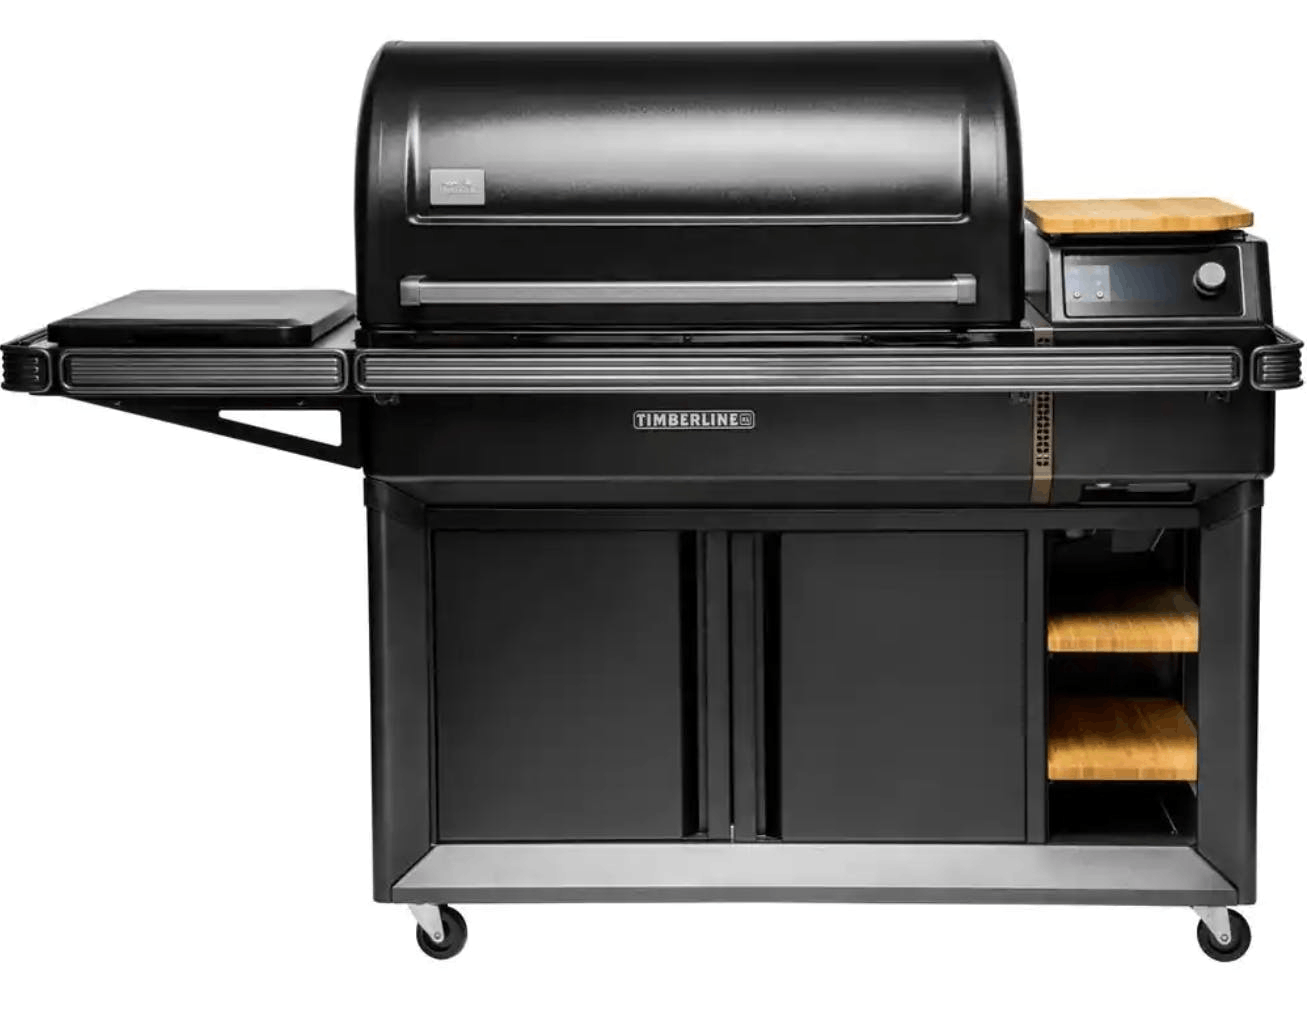 Product image of the Traeger Timberline XL WiFi Pellet Grill.